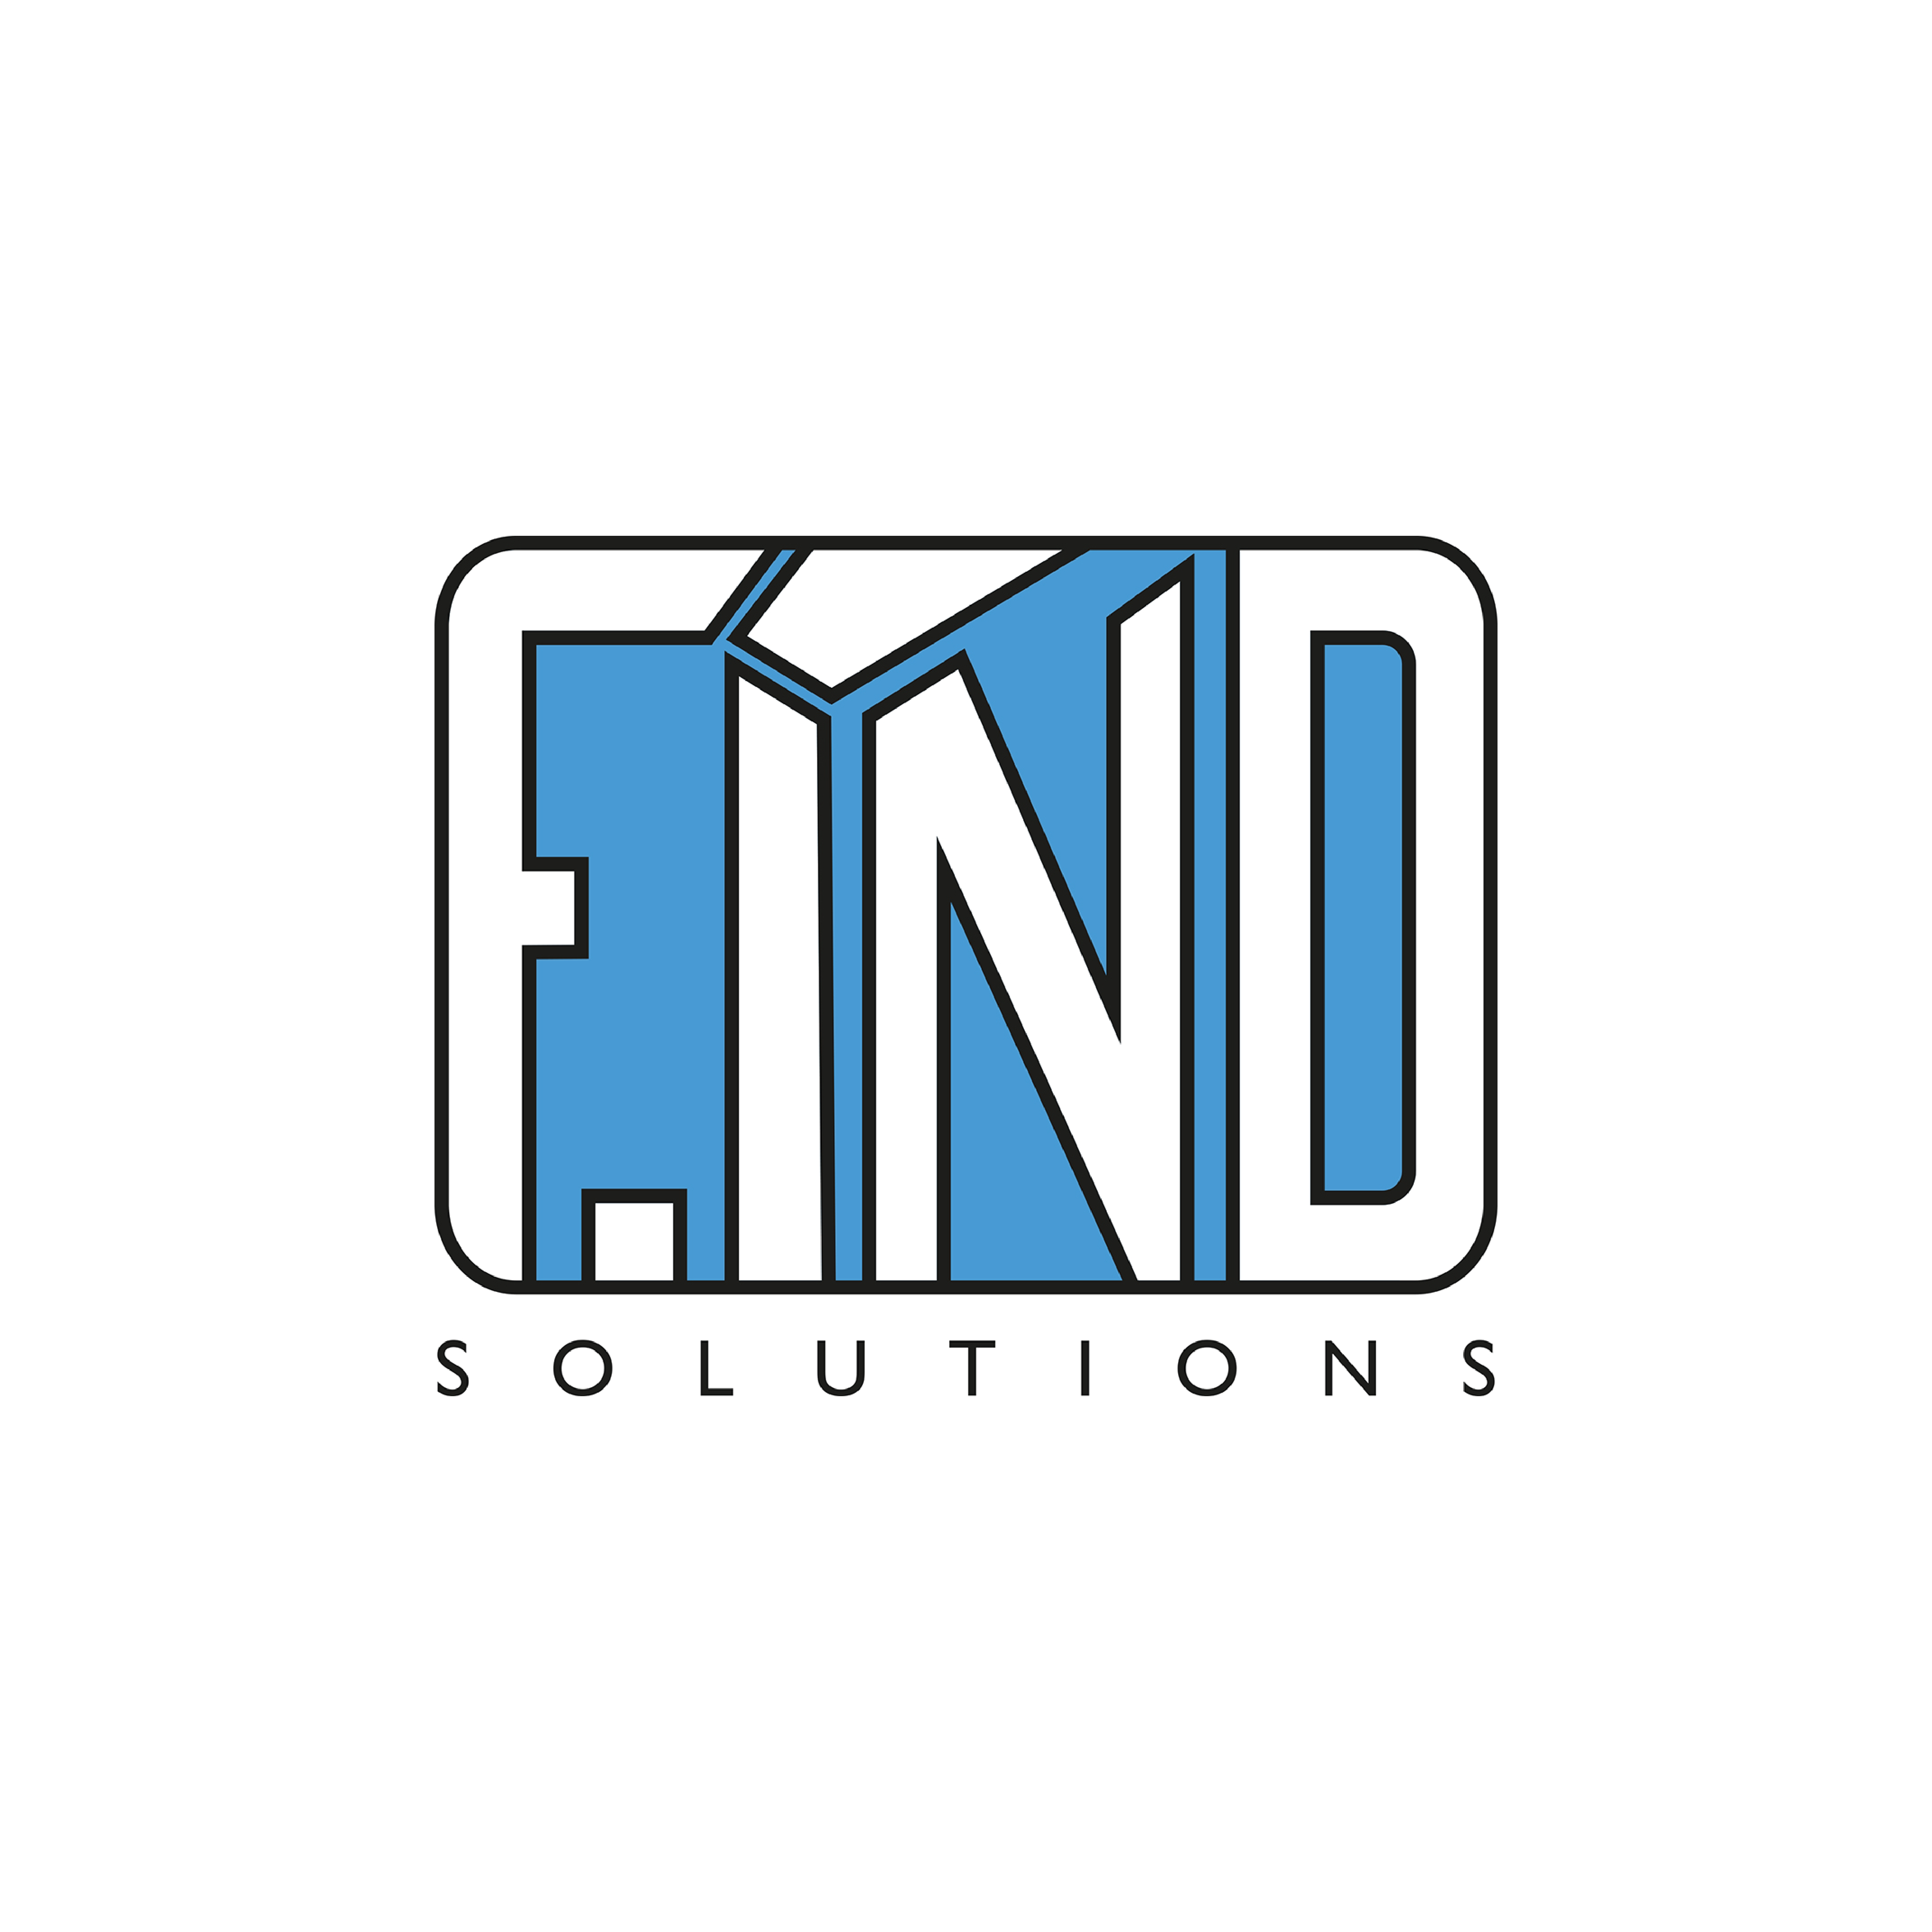 F.IND SOLUTIONS